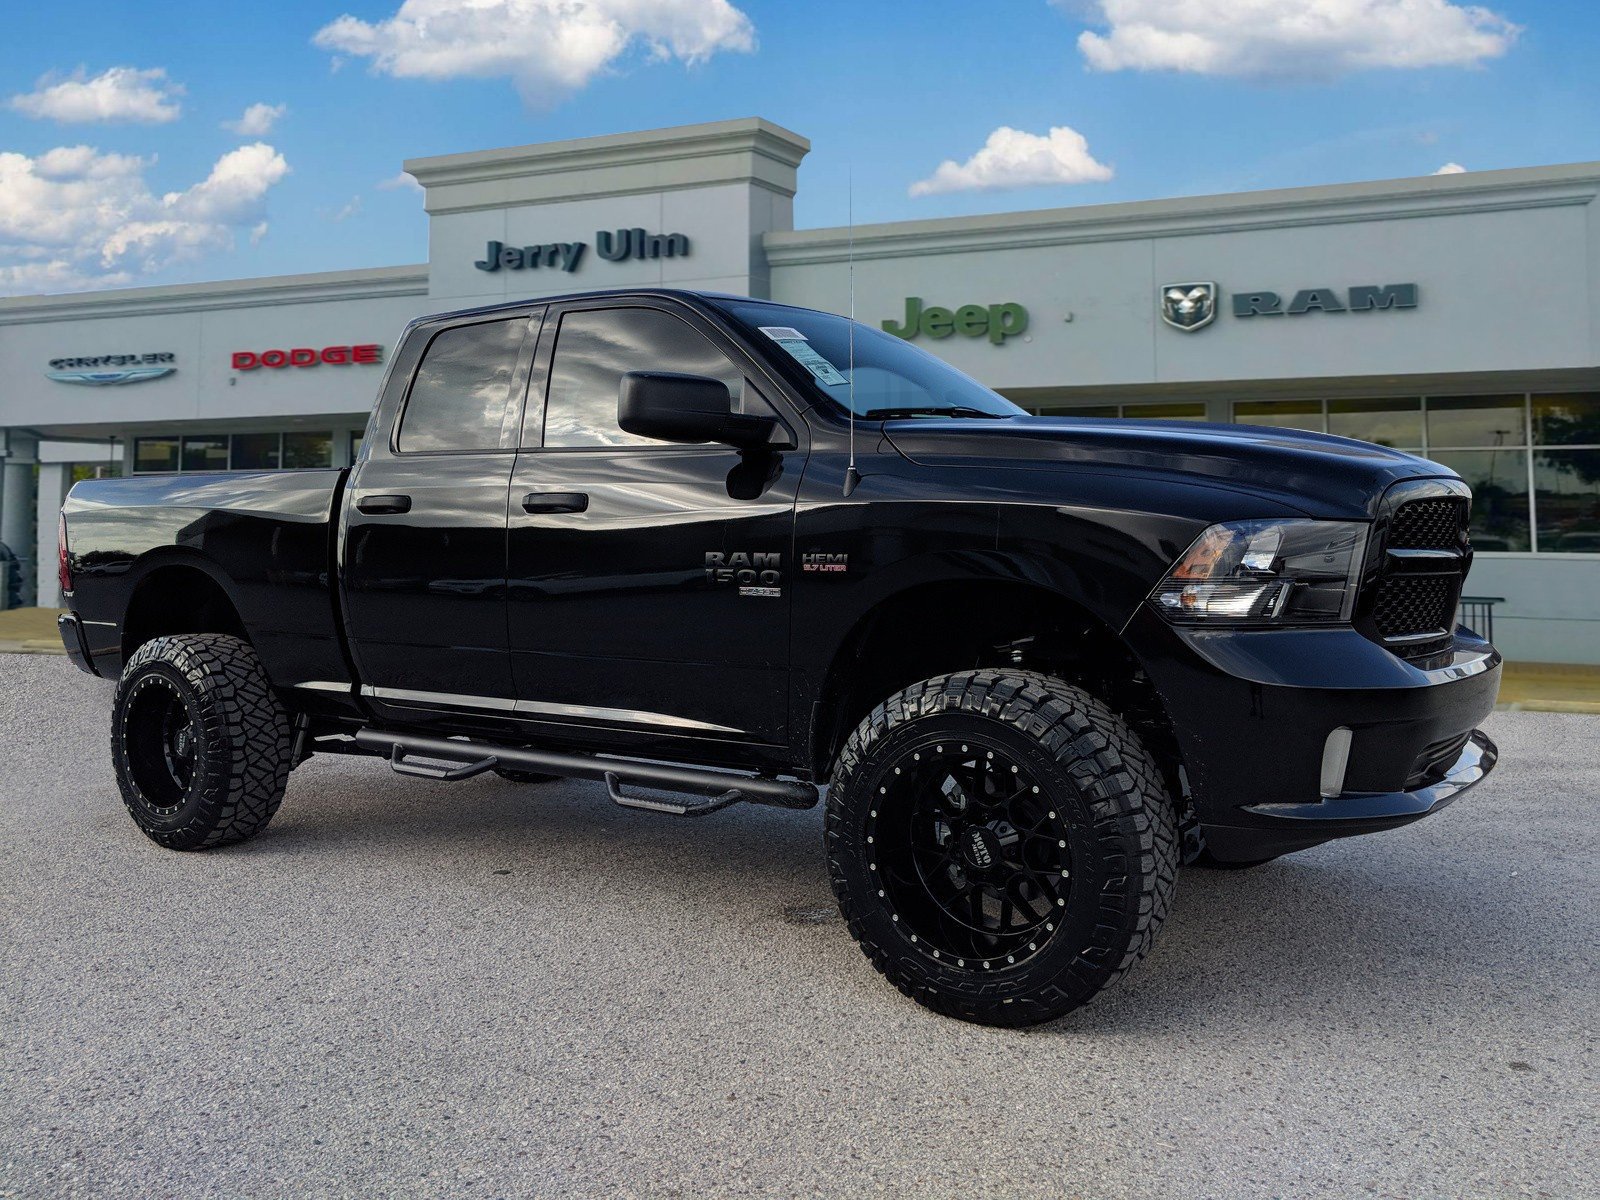 New 2019 RAM 1500 Classic Express Quad Cab in Tampa #S531353 | Jerry Ulm Chrysler, Dodge, Jeep, Ram What Size Tires Are On A 2019 Ram 1500 Classic